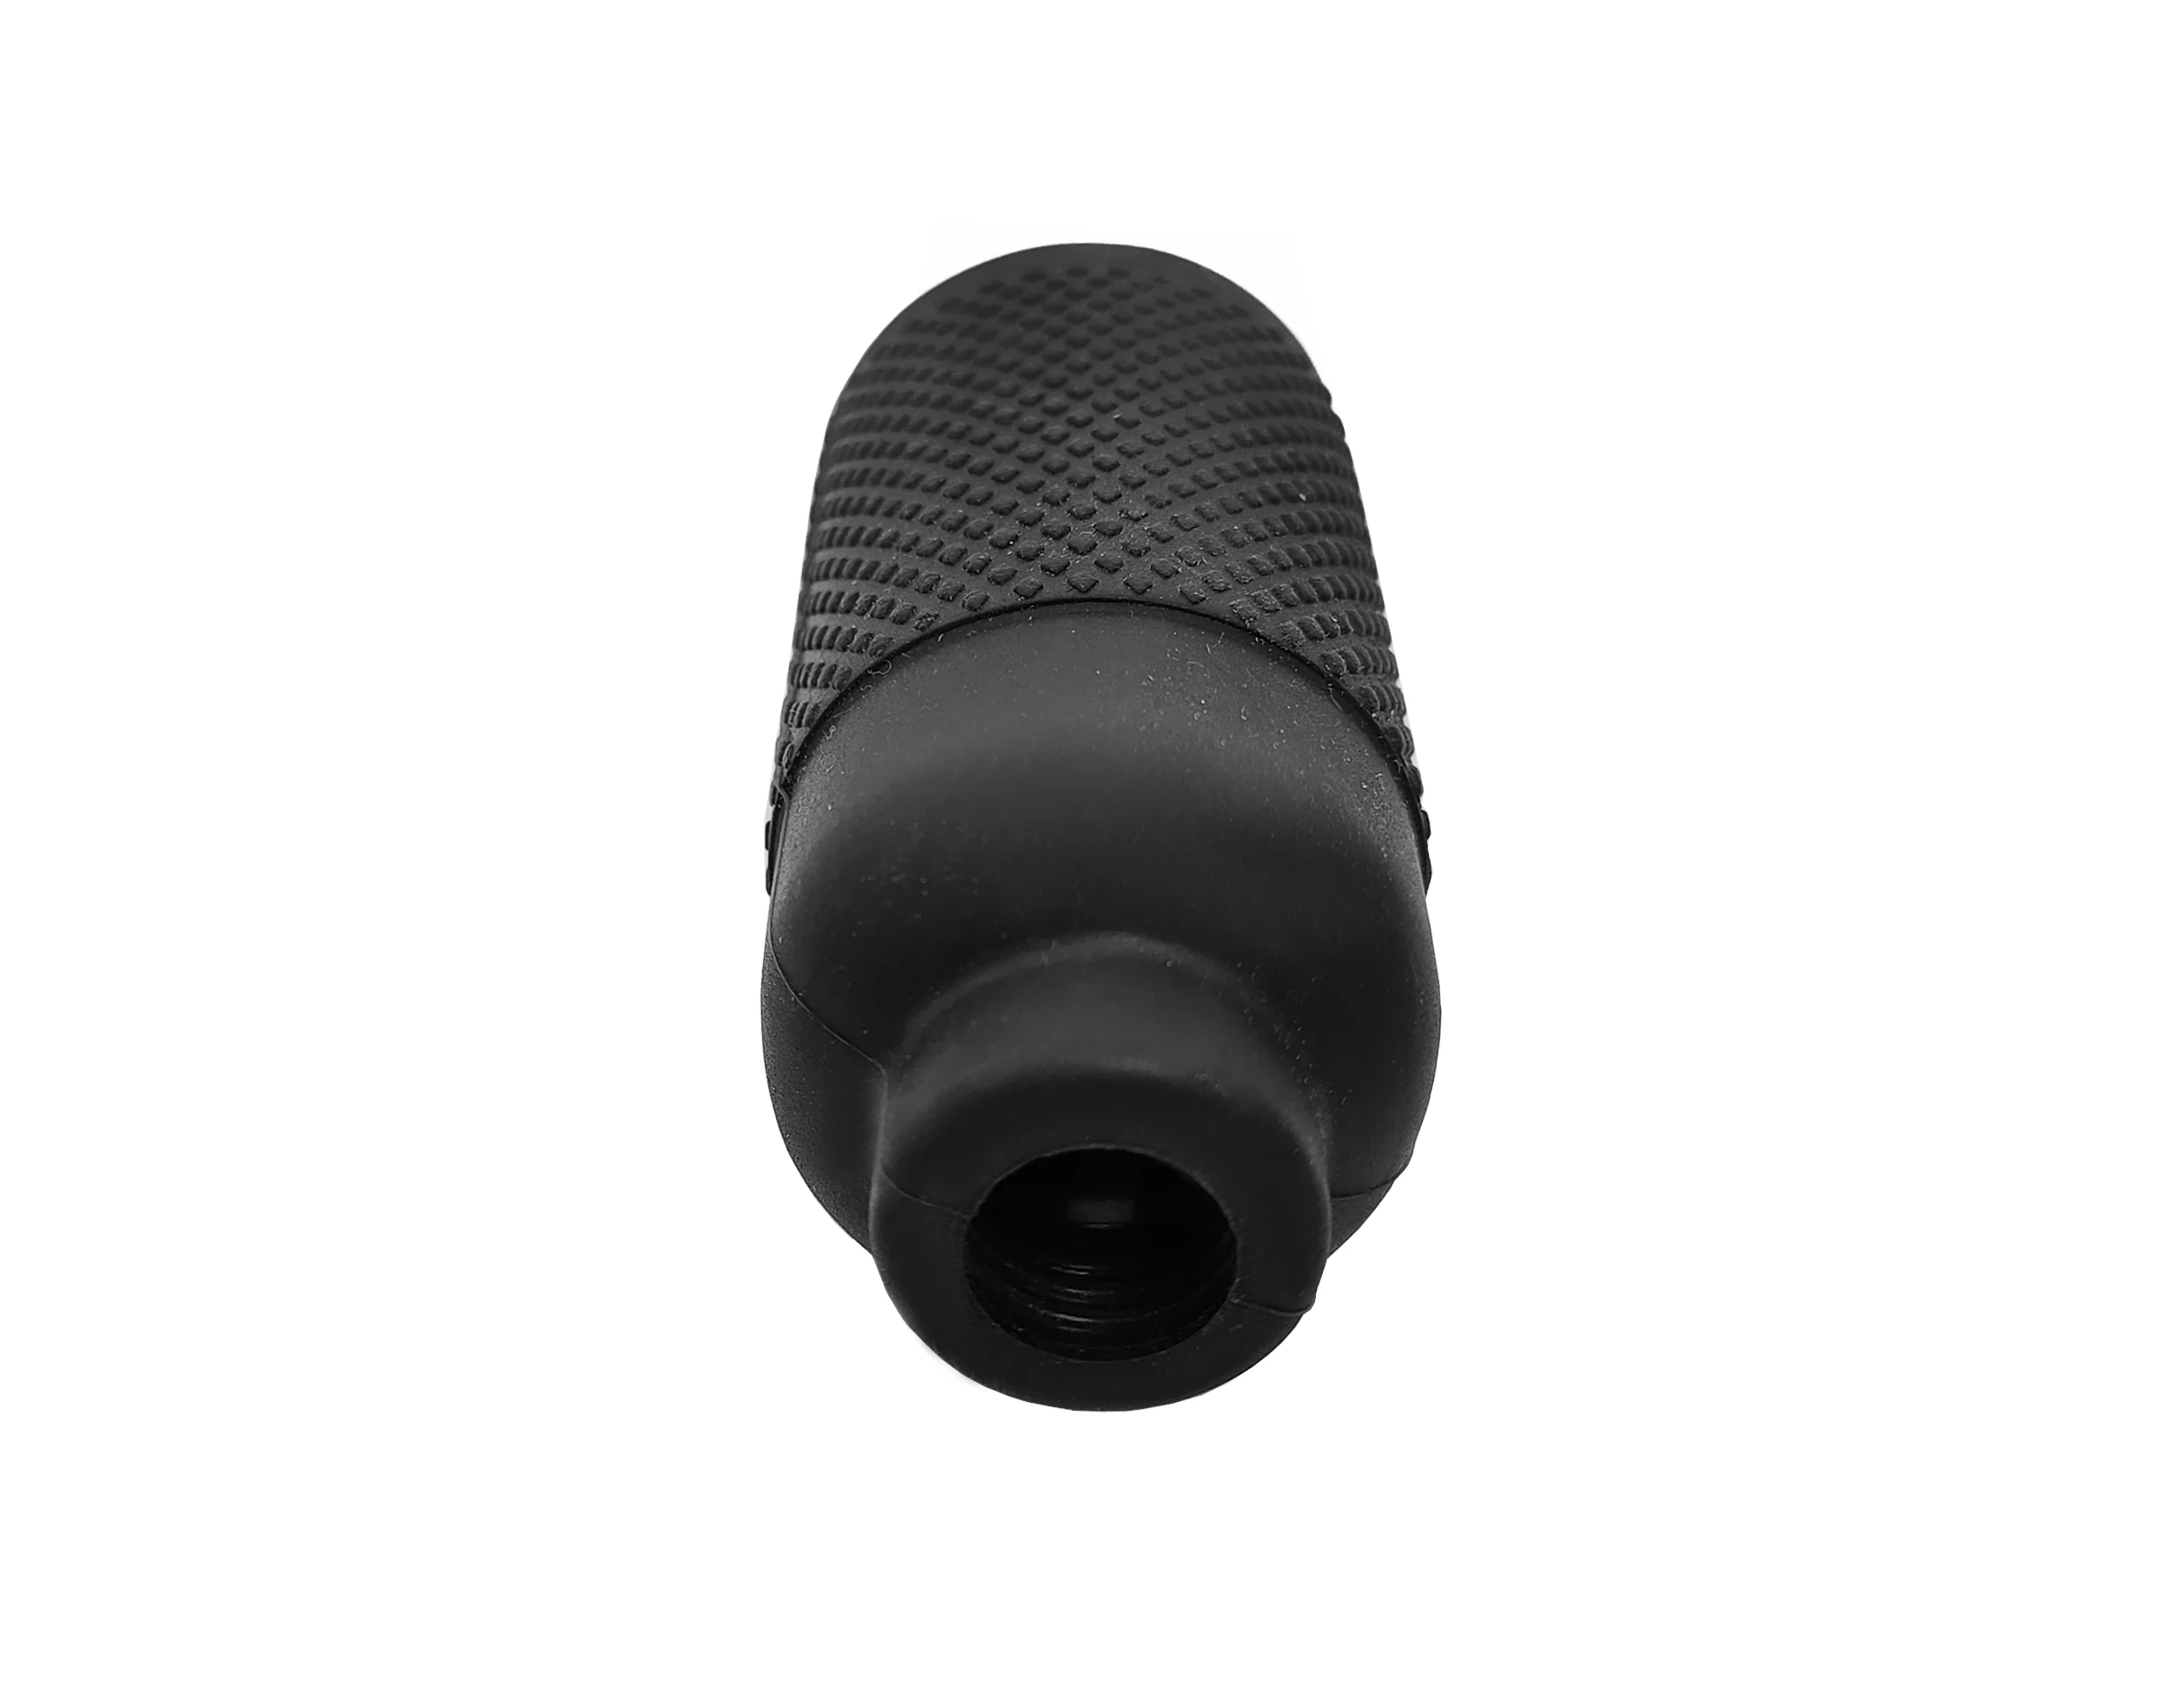 Waterproof silicone connector rubber Boots for 4.310 Din male plug Connector for 1/2 cable Boots manufacture